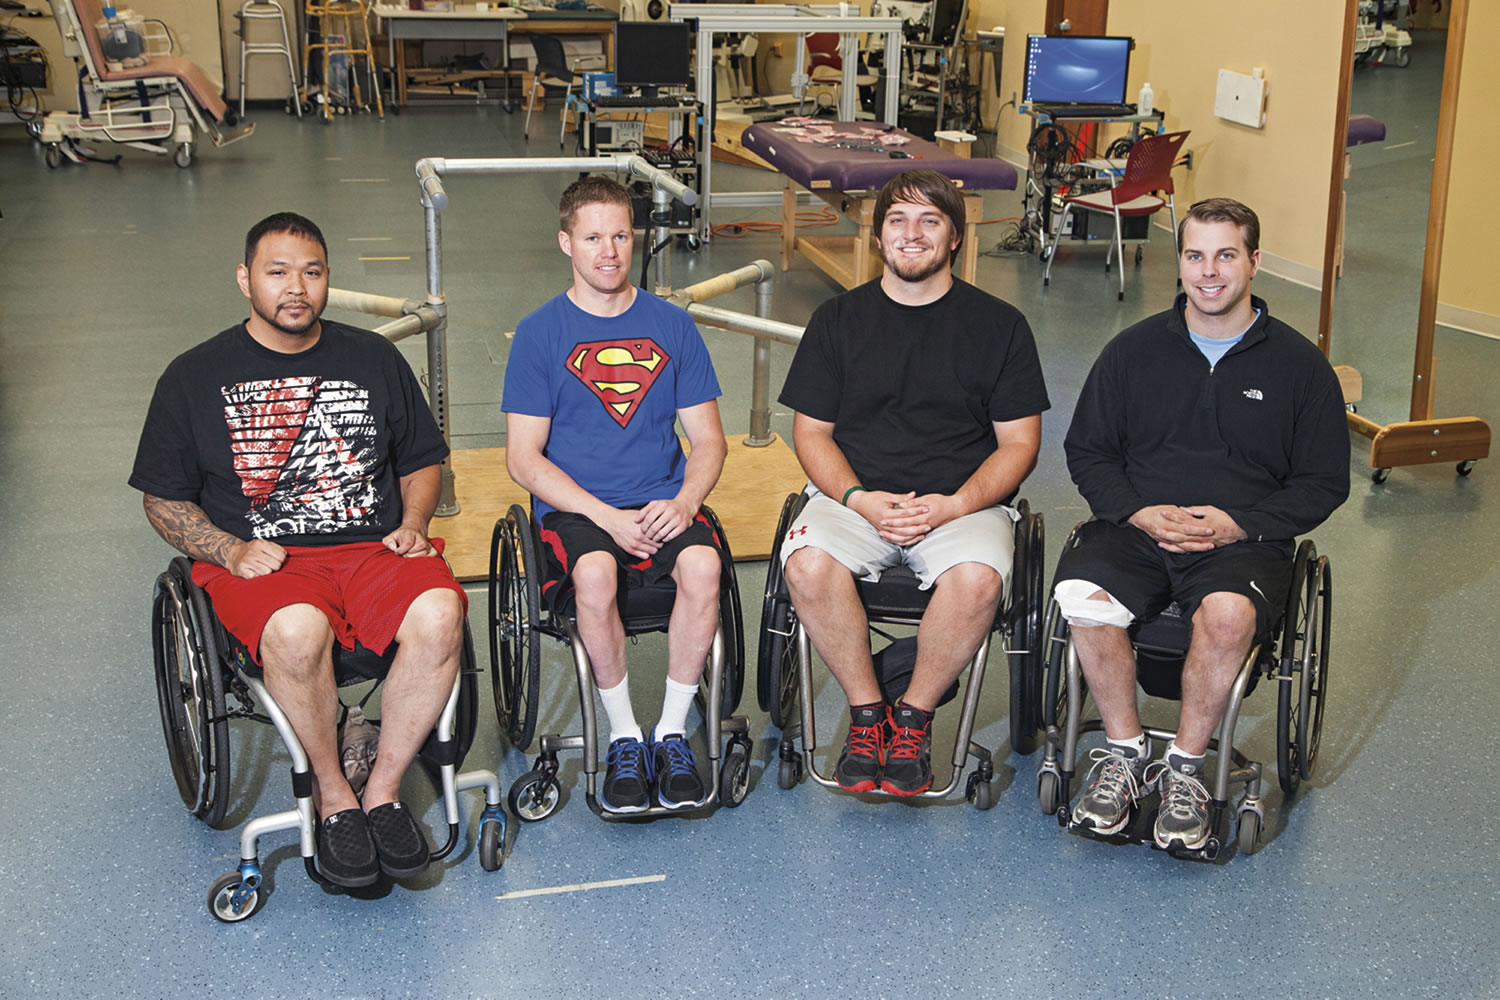 Andrew Meas, from left, Dustin Shillcox, Kent Stephenson and Rob Summers are the first four to undergo task-specific training with epidural stimulation at the Human Locomotion Research Center laboratory, Frazier Rehab Institute, as part of the University of Louisville's Kentucky Spinal Cord Injury Research Center in Louisville Ky.